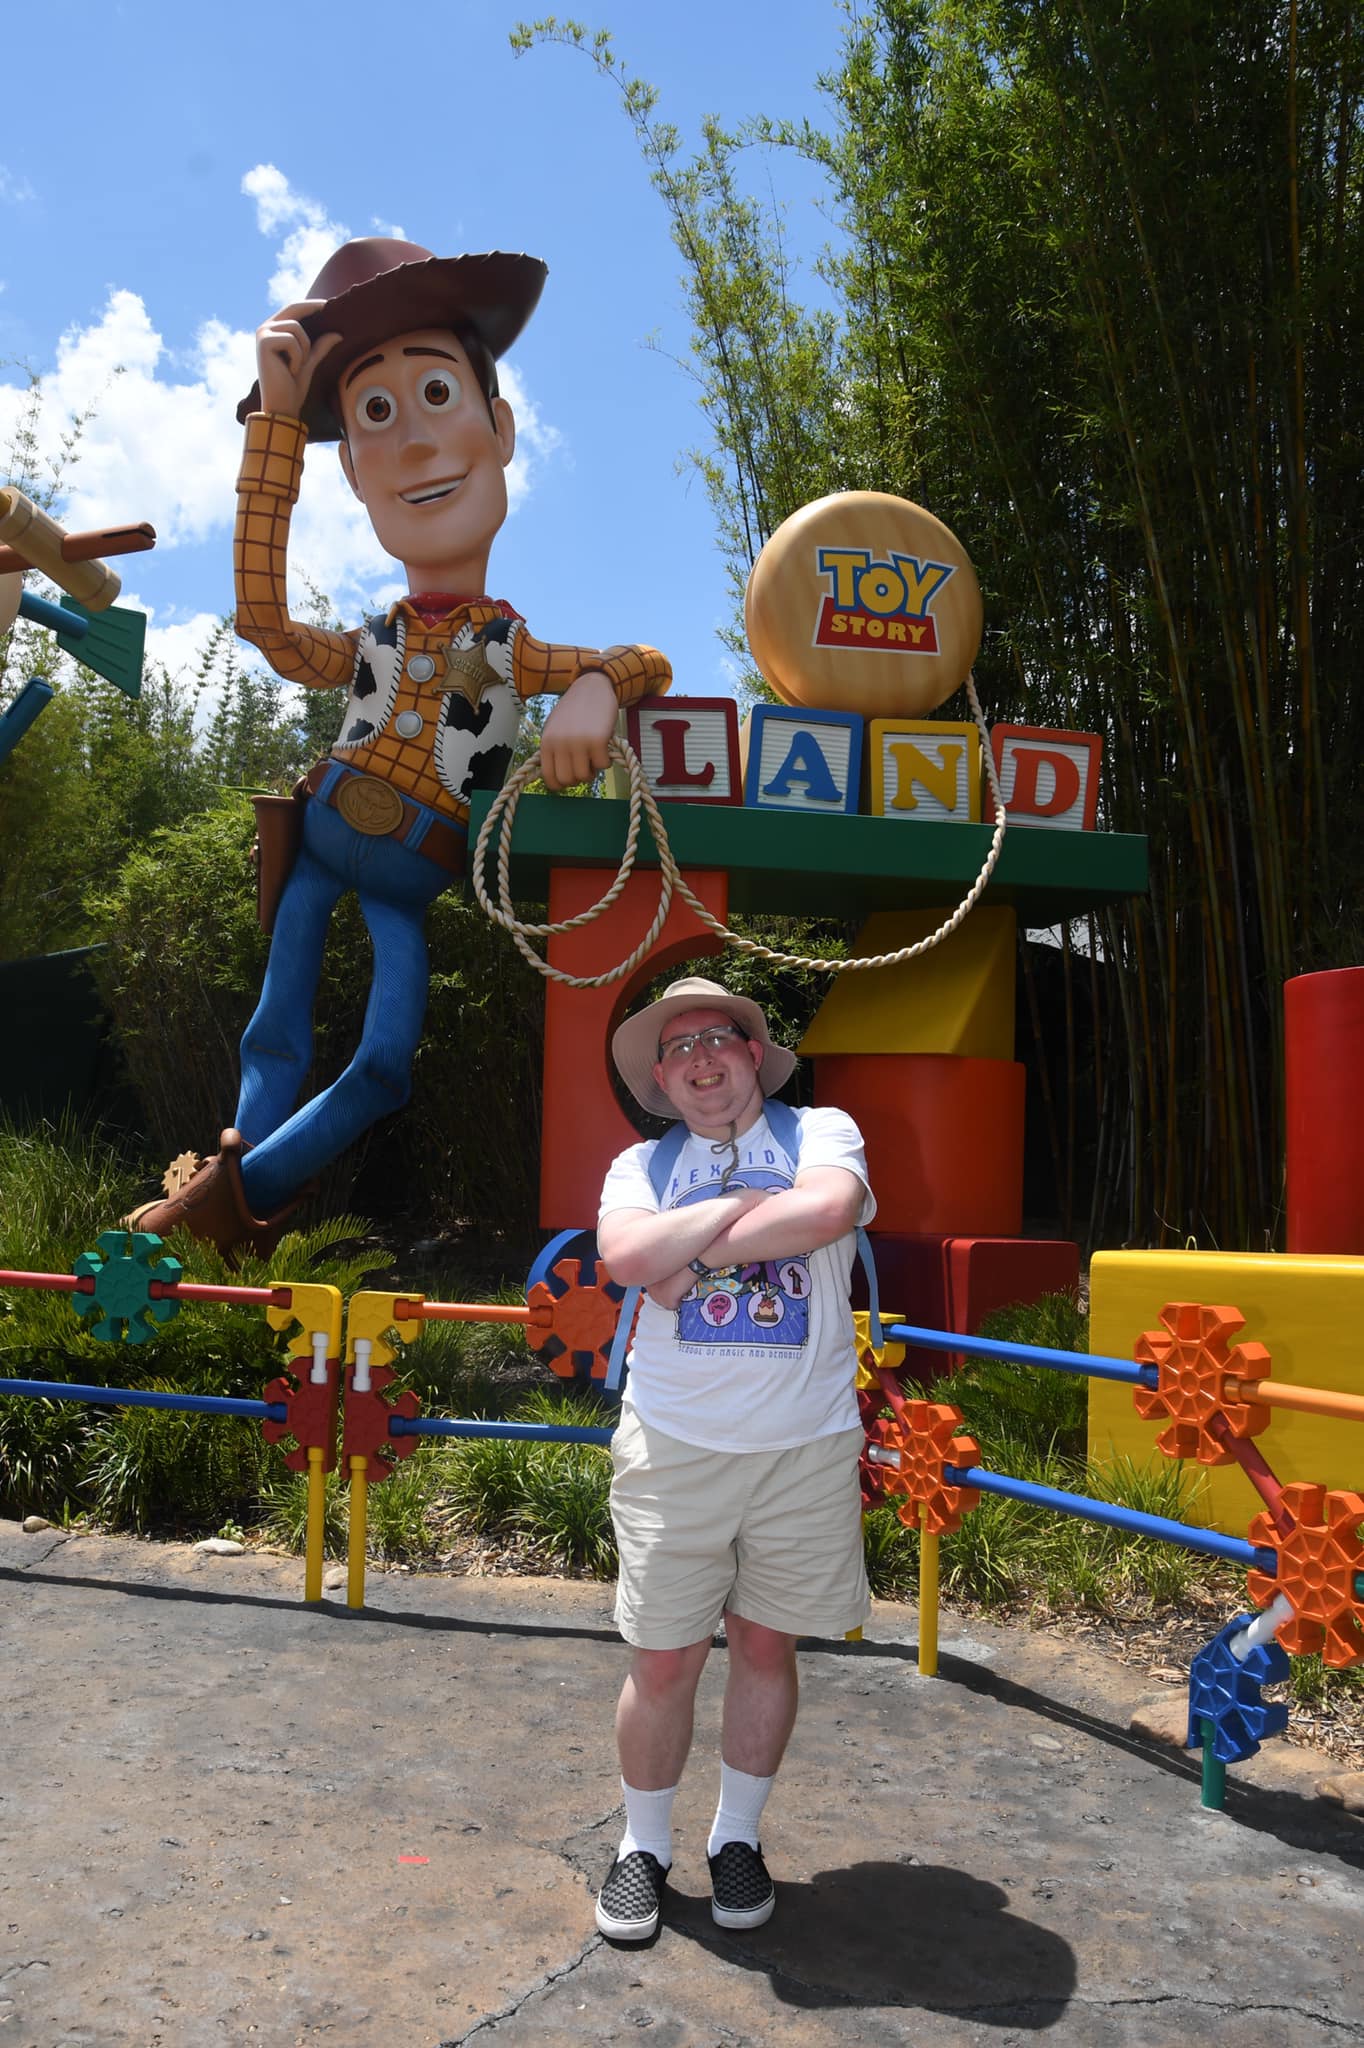 Posing with the Toy Story Land sign